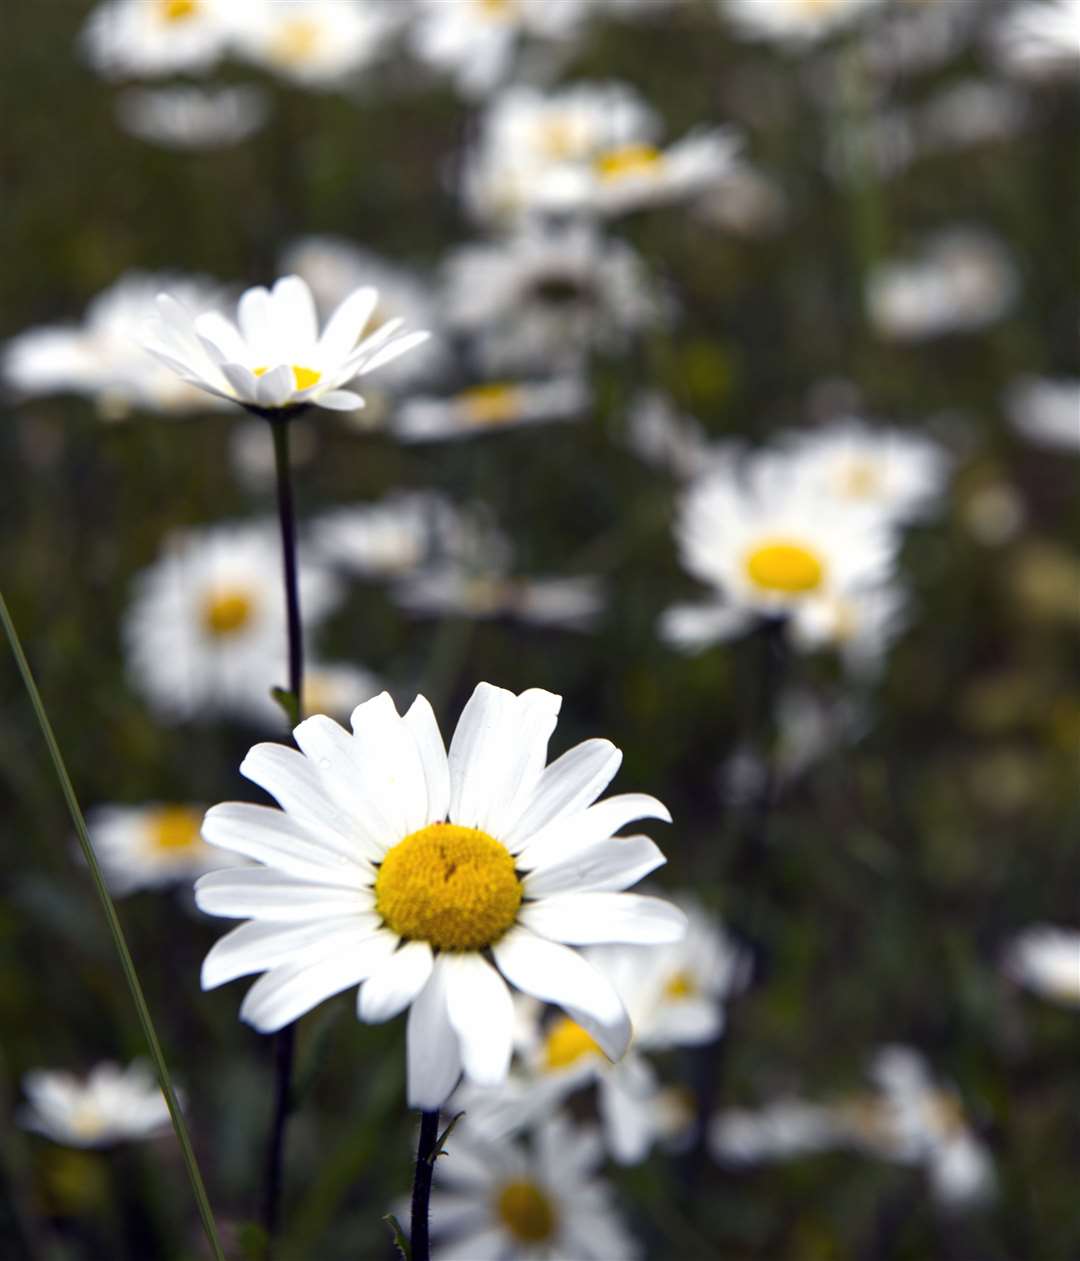 Oxeye daisies in June Picture: National Trust Images/John Miller